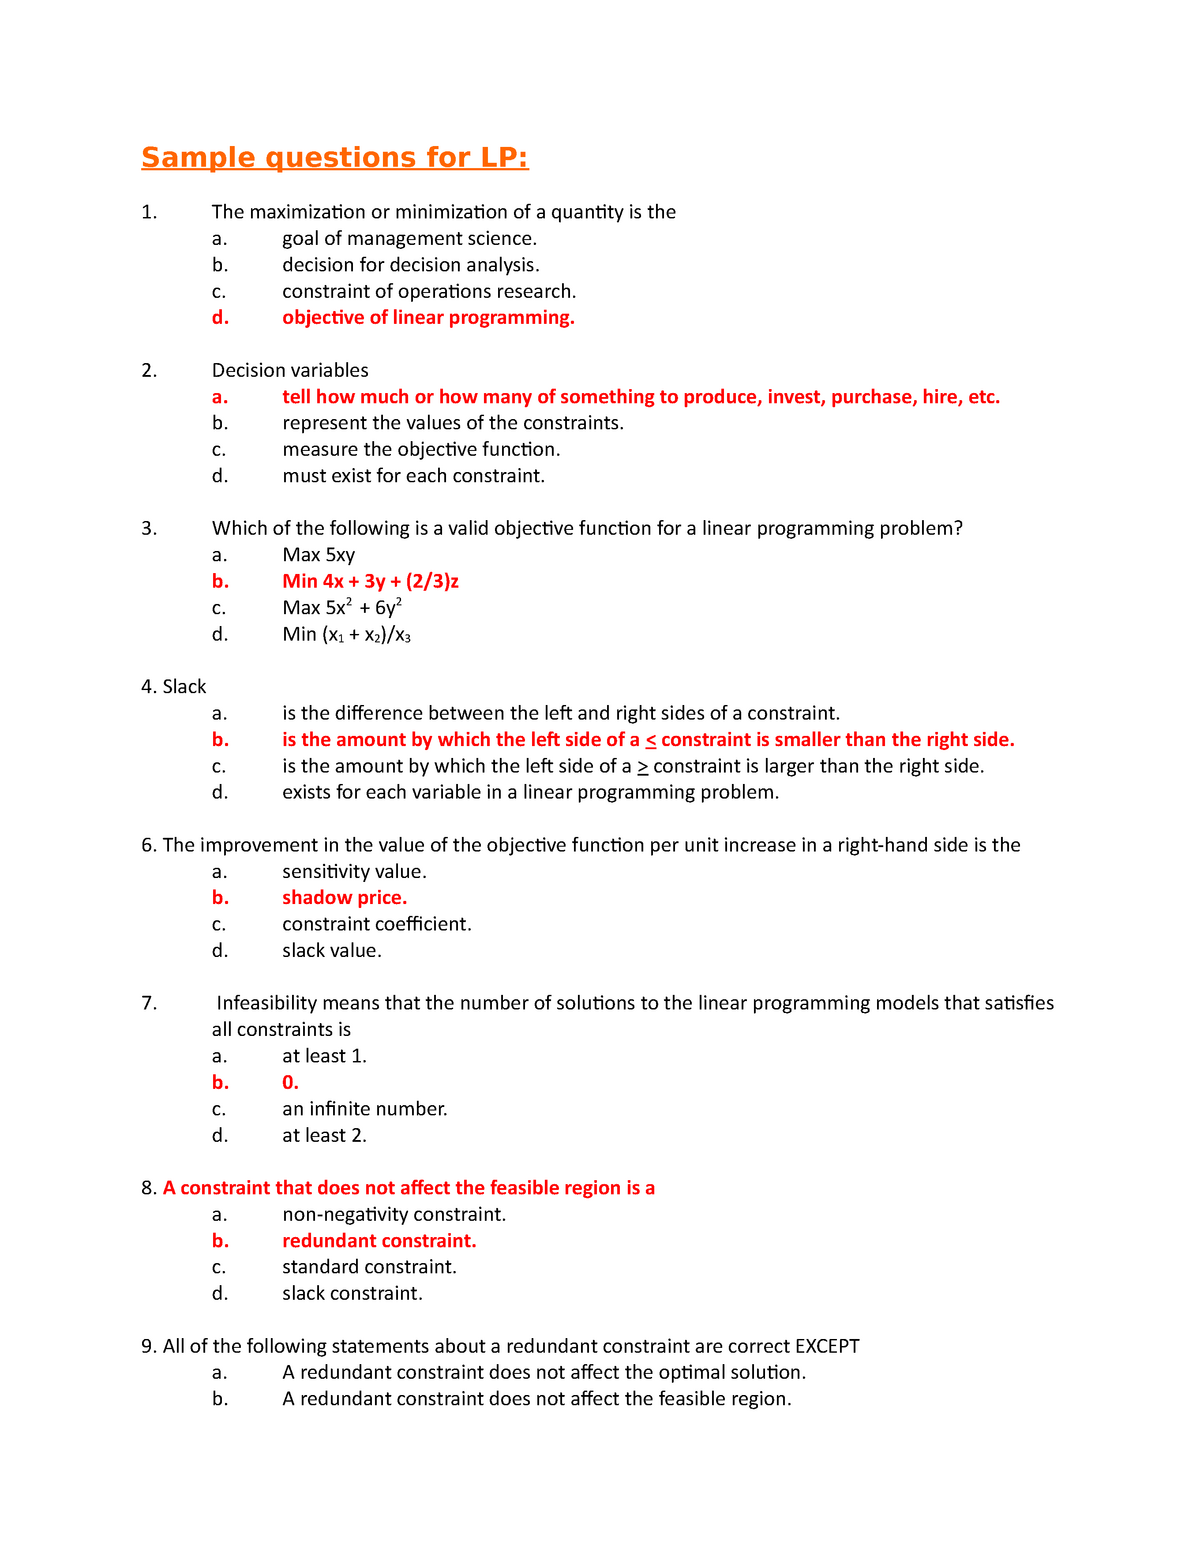 operations research sample questions and answers